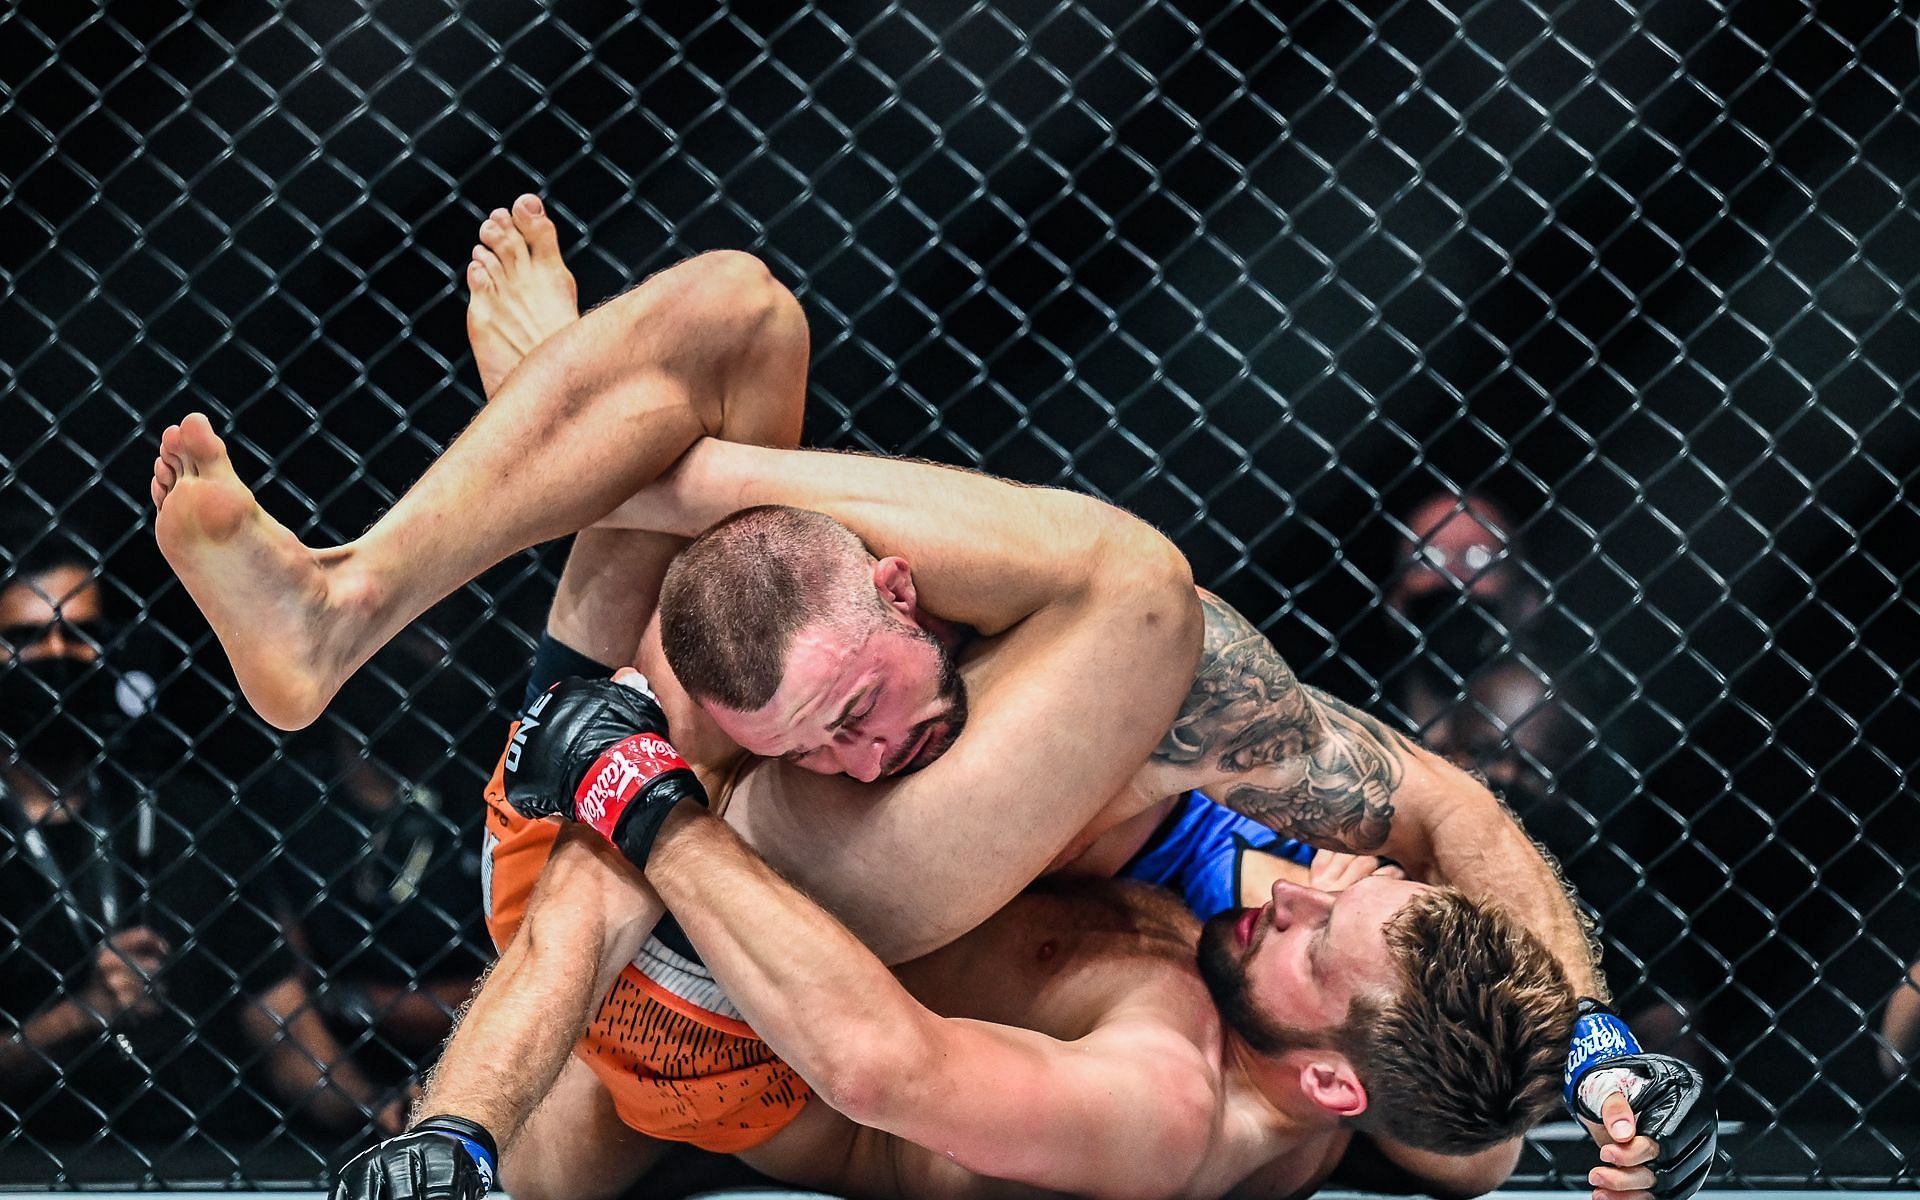 Reinier de Ridder submits Vitaly Bigdash to remain perfect in his career. [Photo ONE Championship]